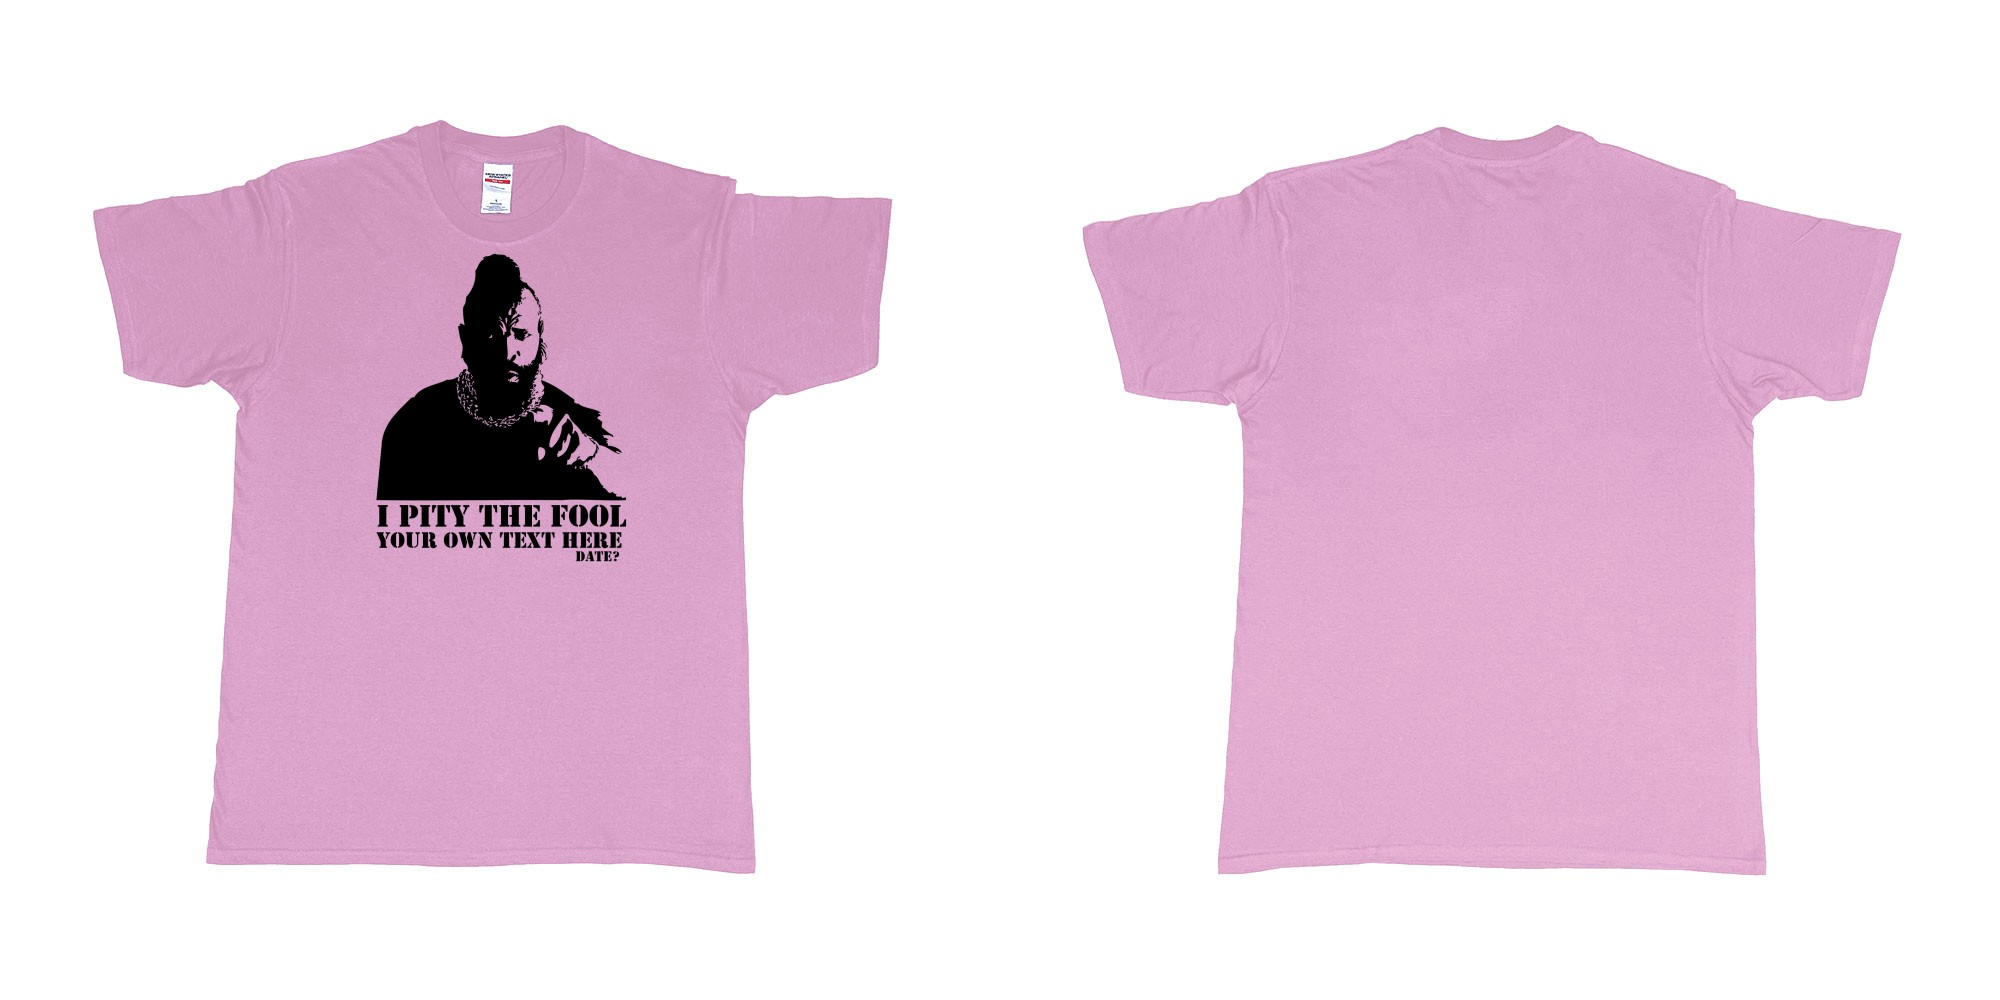 Custom tshirt design I pity the fool in fabric color light-pink choice your own text made in Bali by The Pirate Way